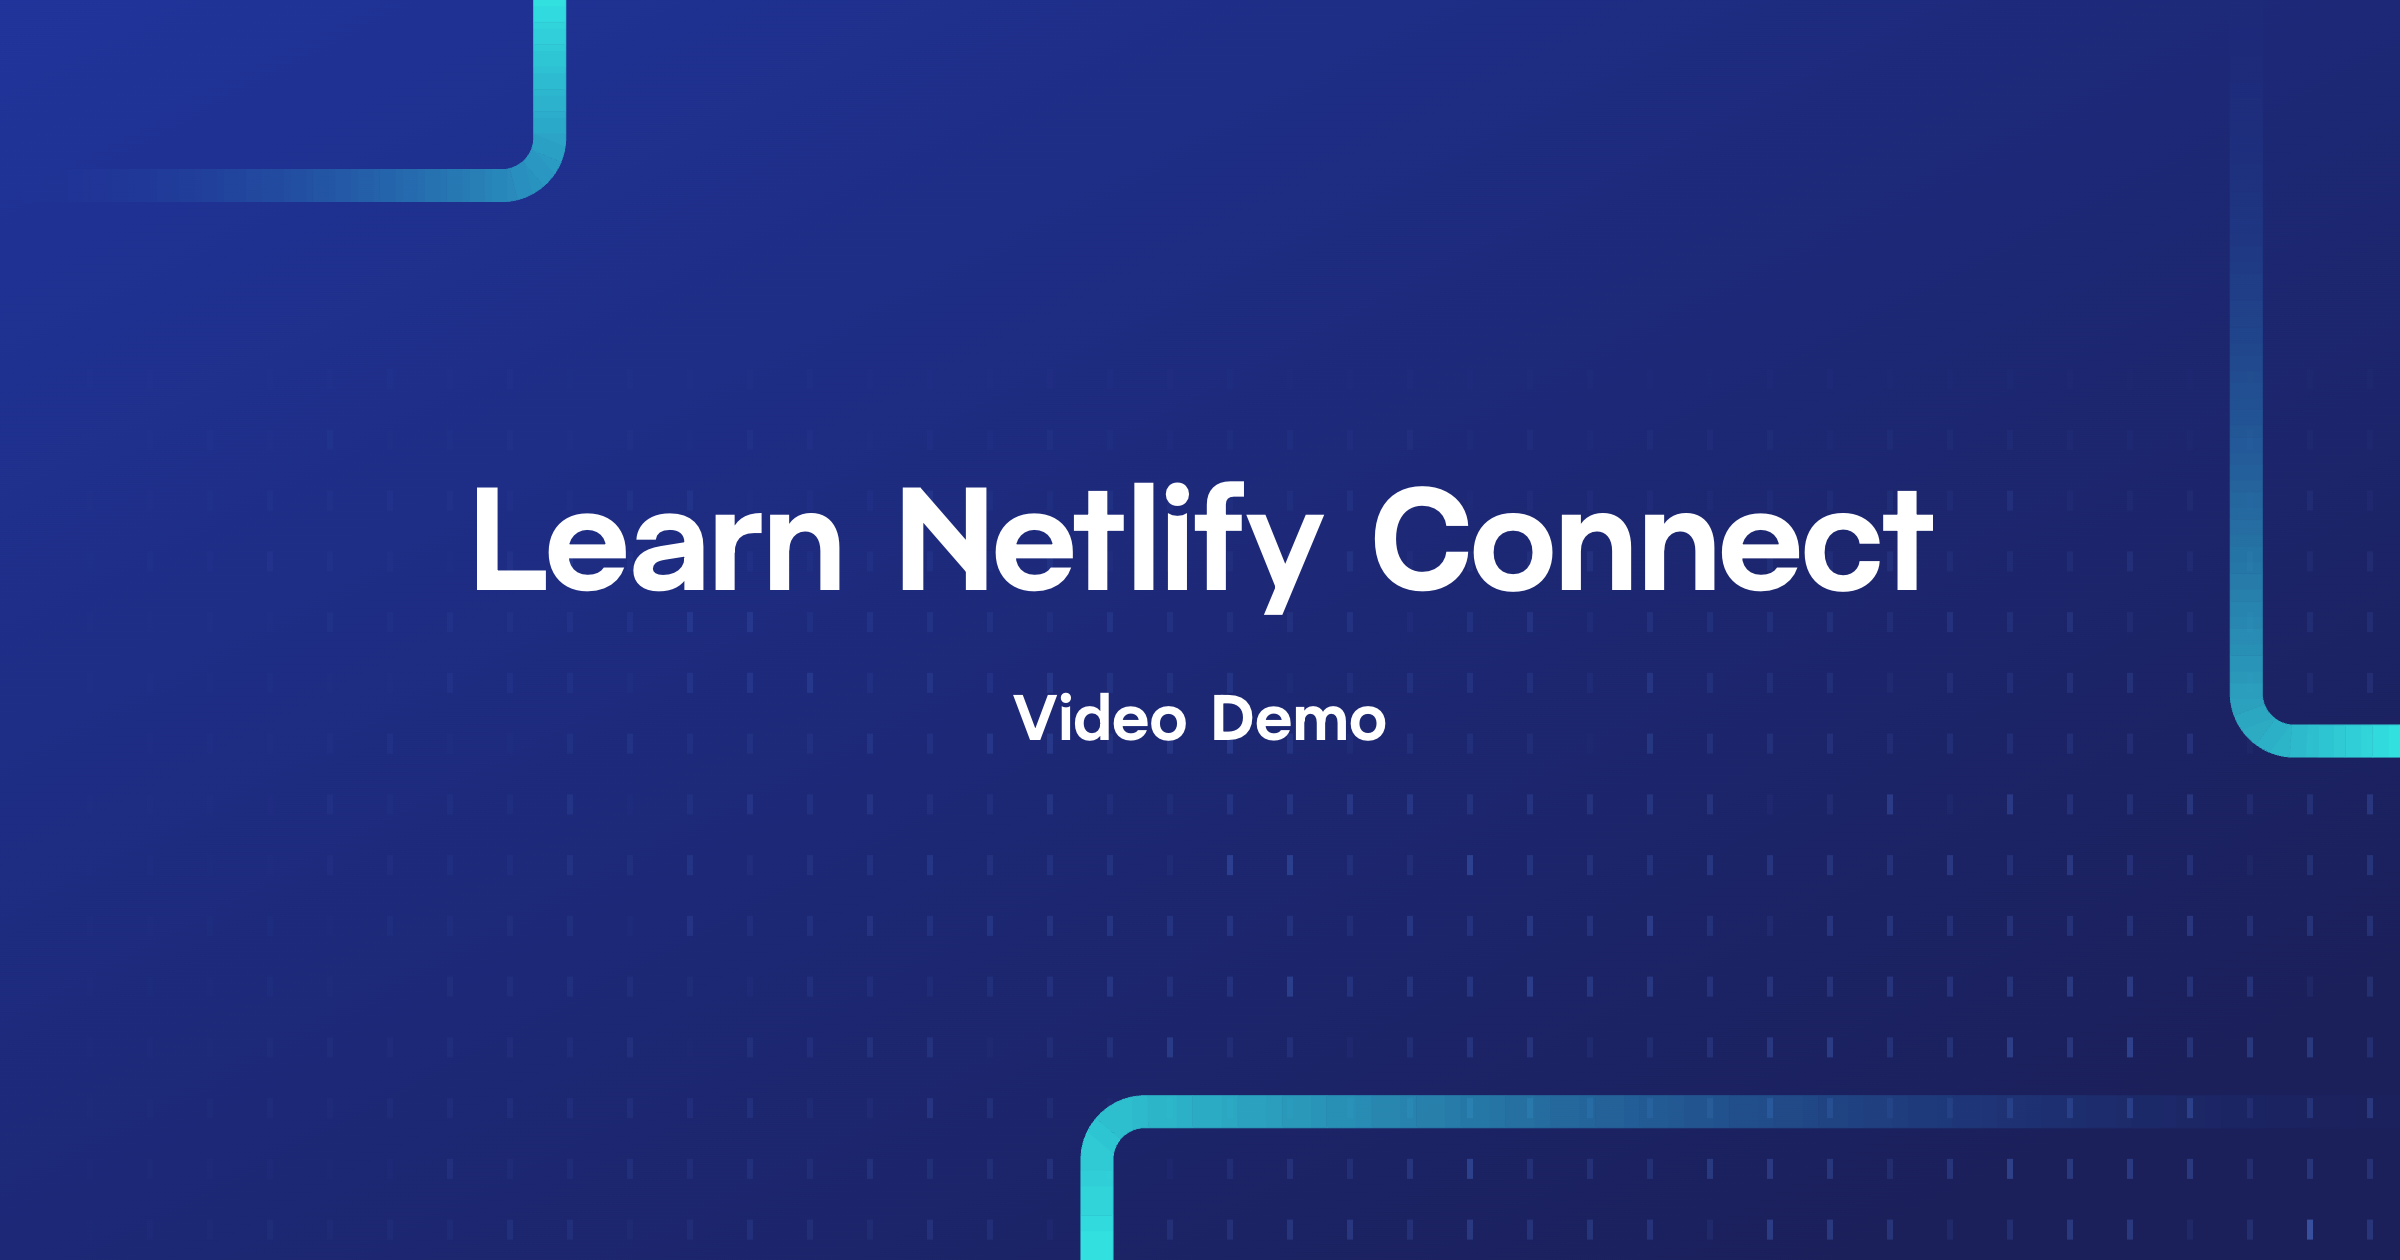 Purple gradient background with the text "Learn Netlify Connect" in the center